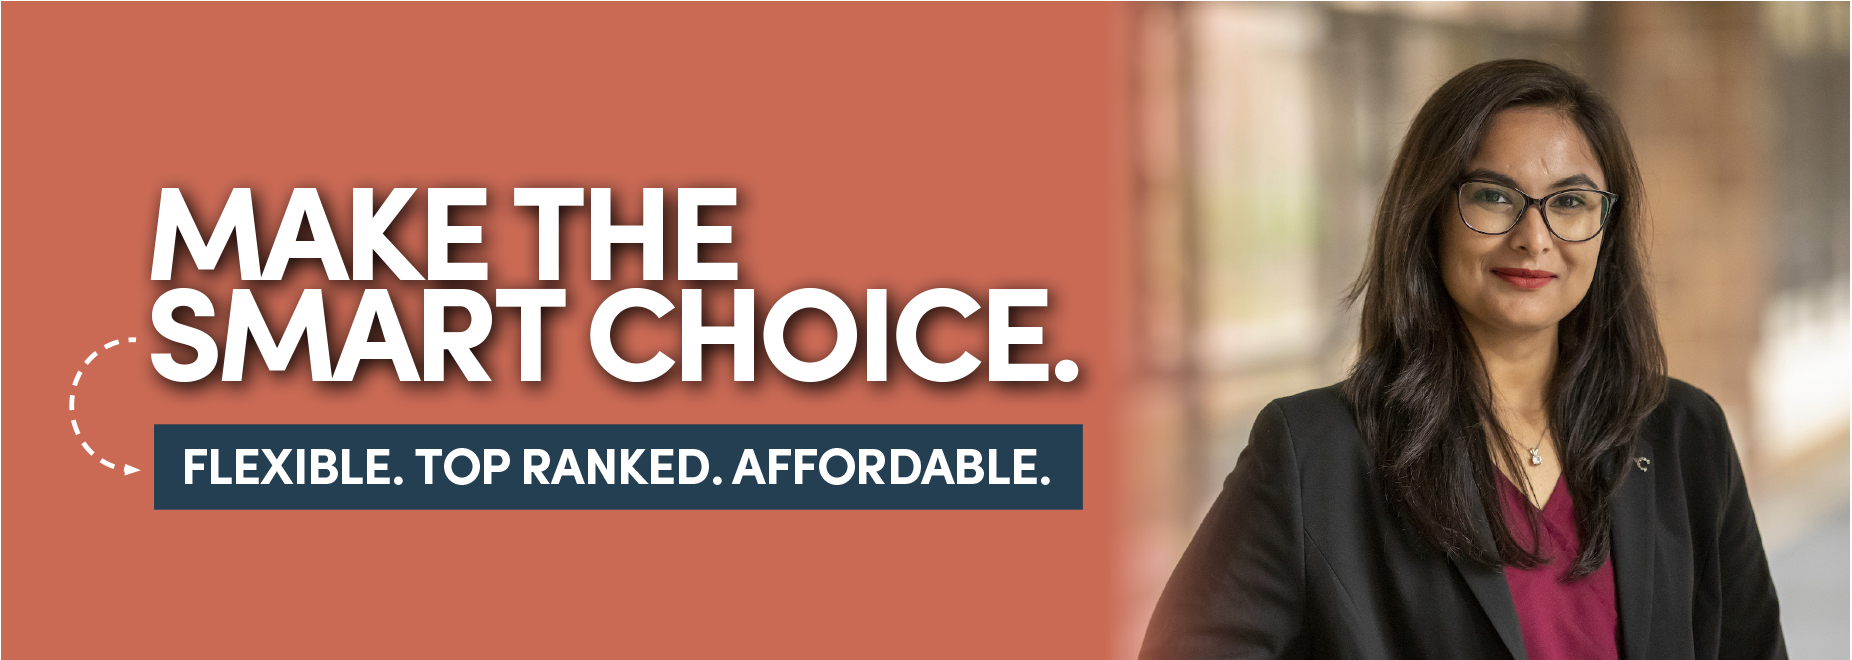 Make the smart choice. Flexible. Top ranked. Affordable. 